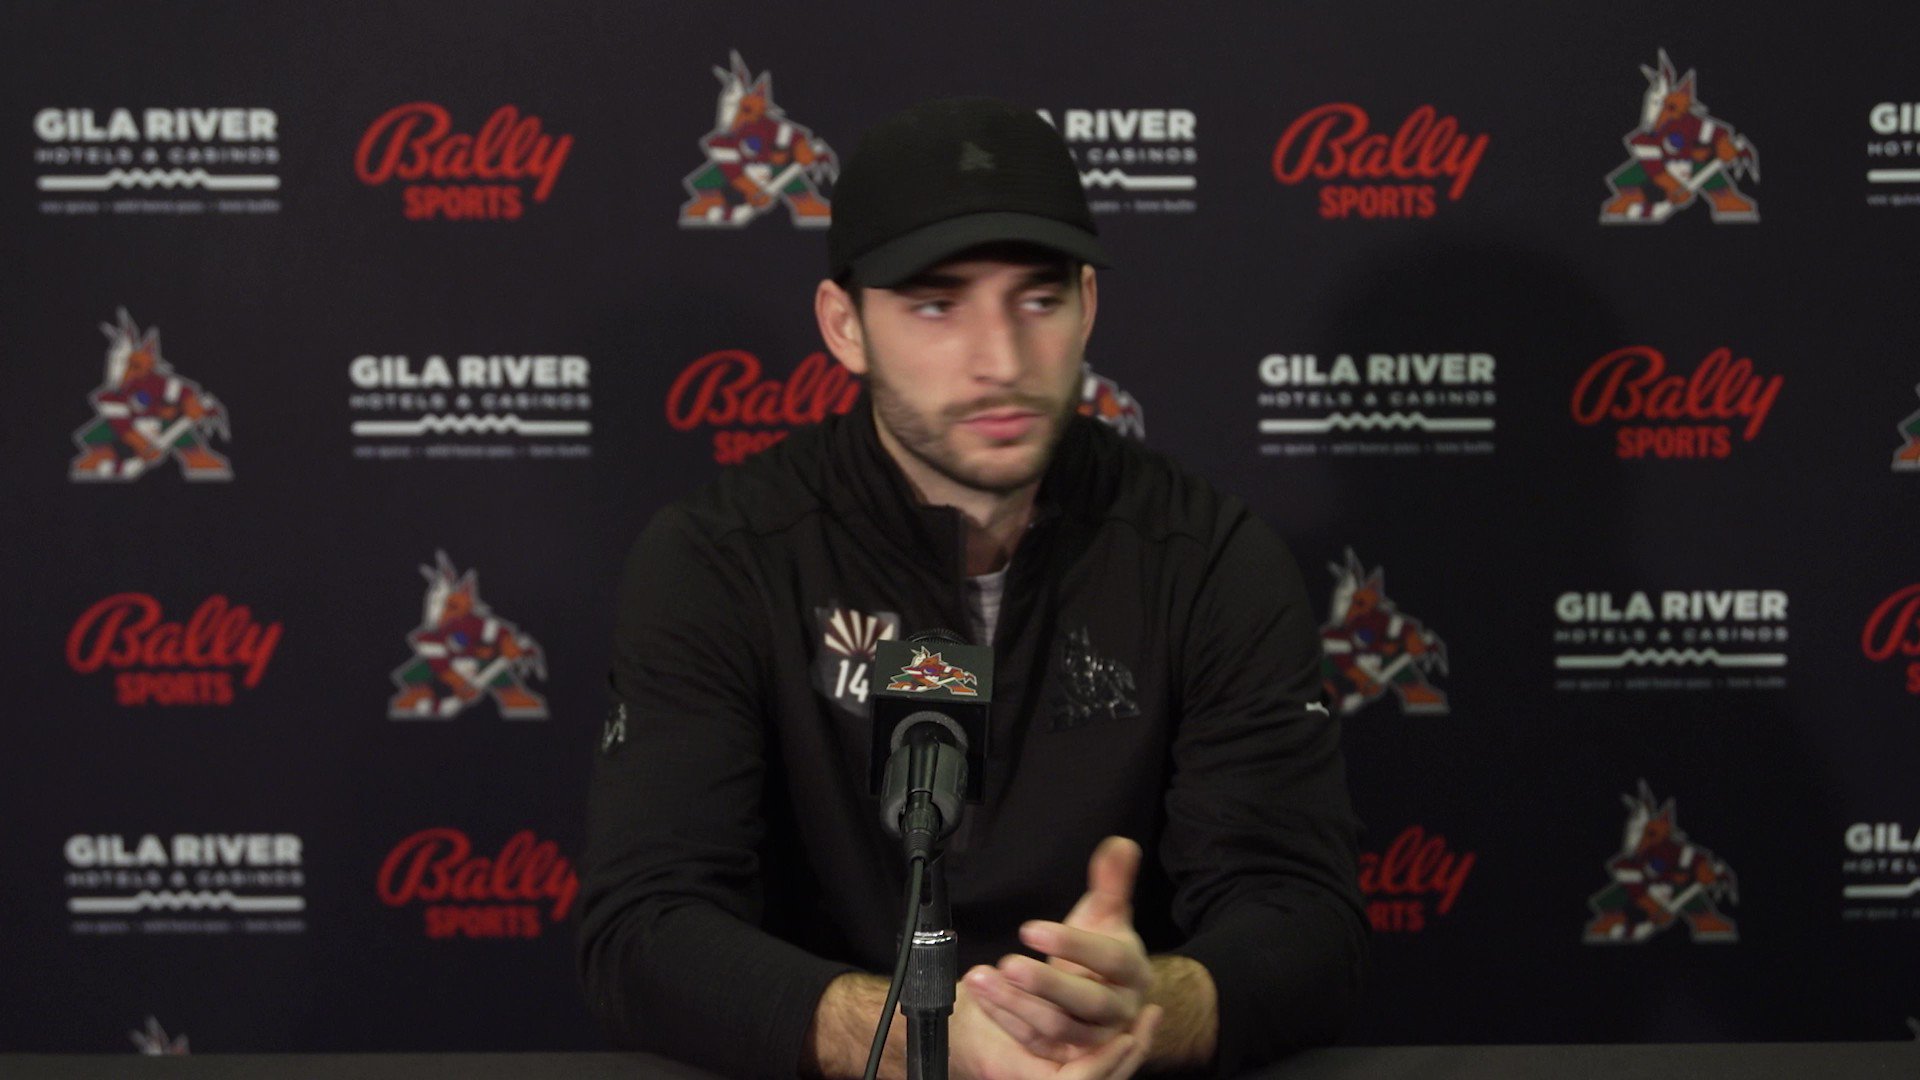 I live in Phoenix and seeing Shayne Gostisbehere as the face of the Coyotes  (and his 14 goals and 51 points…) really stung this year. Can't believe we  gave up a 2nd